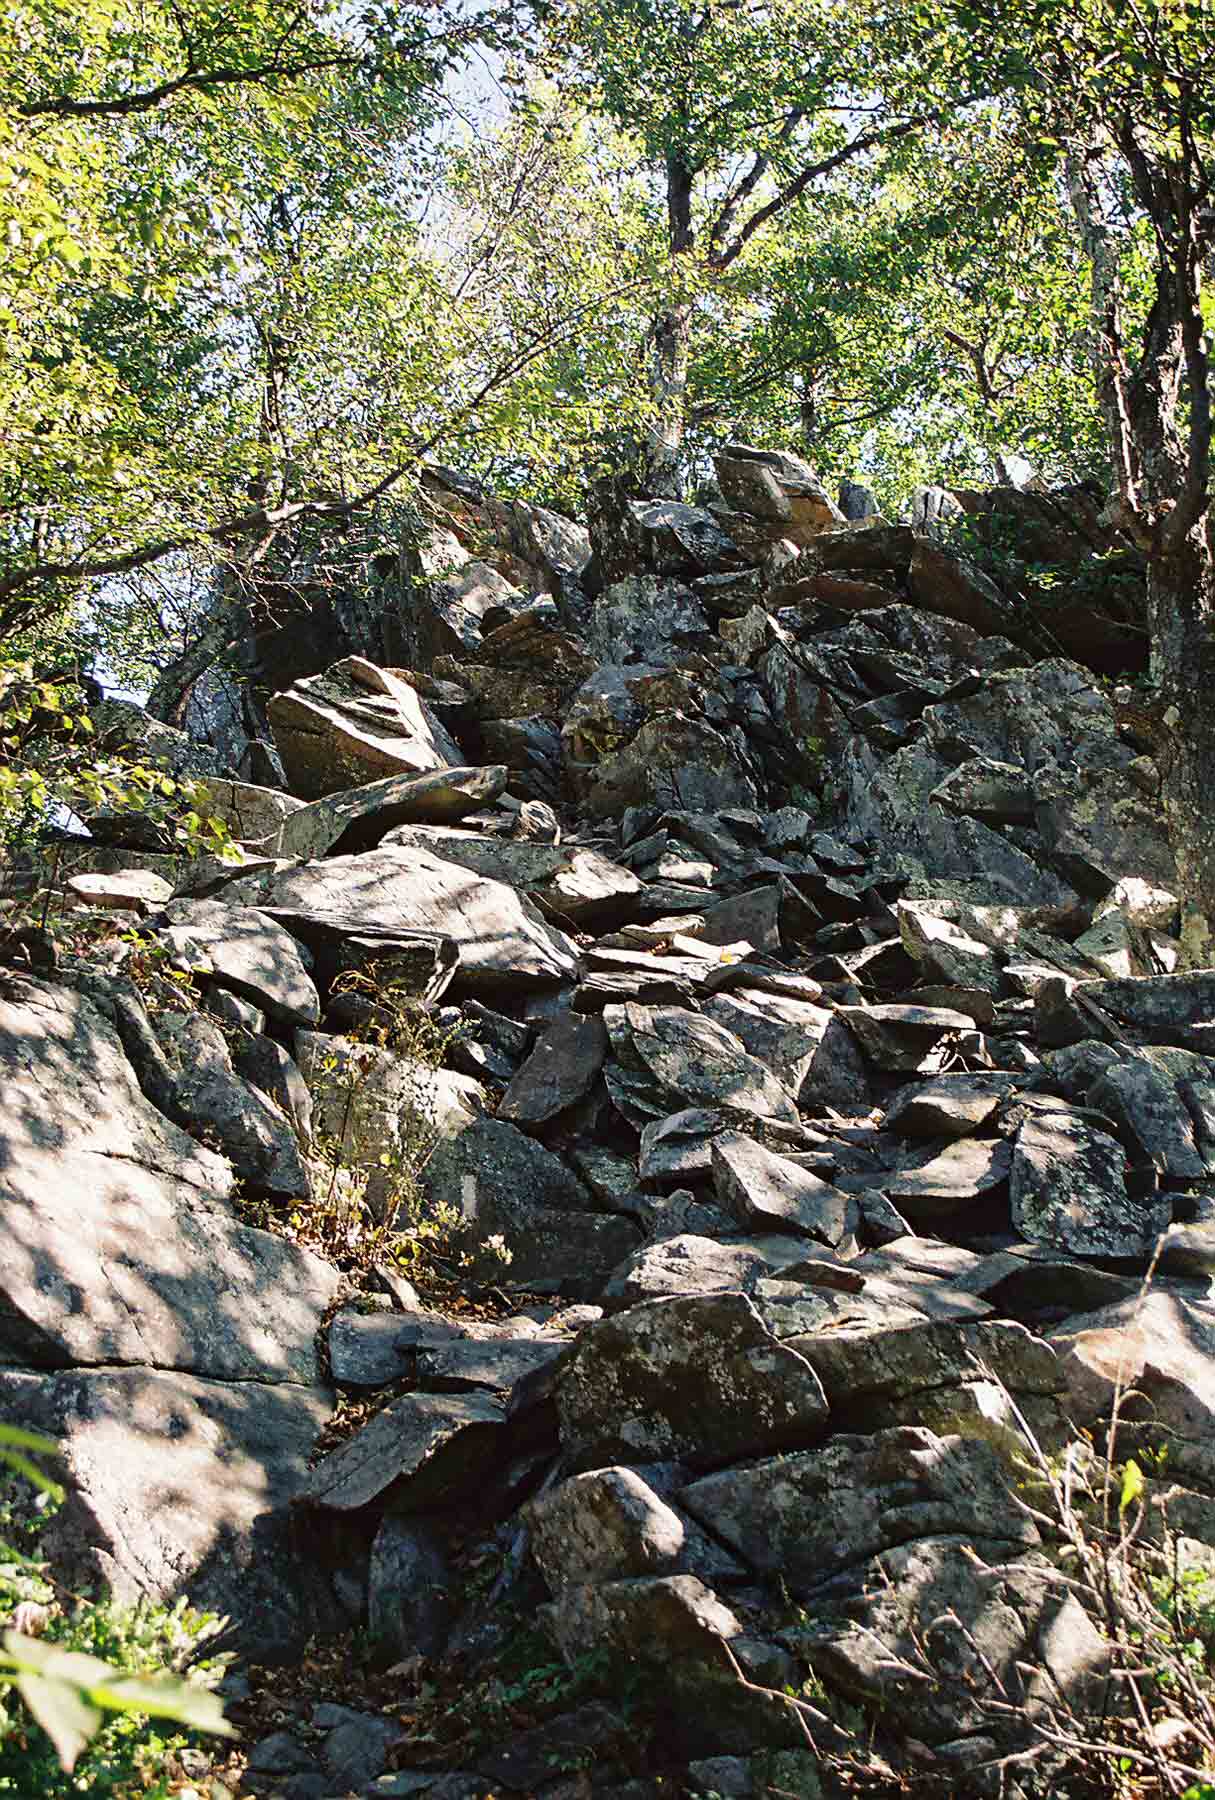 mm 13.4 - In 2003 the northbound AT climbed up these rocks to reach a good viewpoint on a ledge north of DrippingRock  Springs. The AT now bypasses this climb. The old route is blazed blue. Courtesy dlcul@conncoll.edu